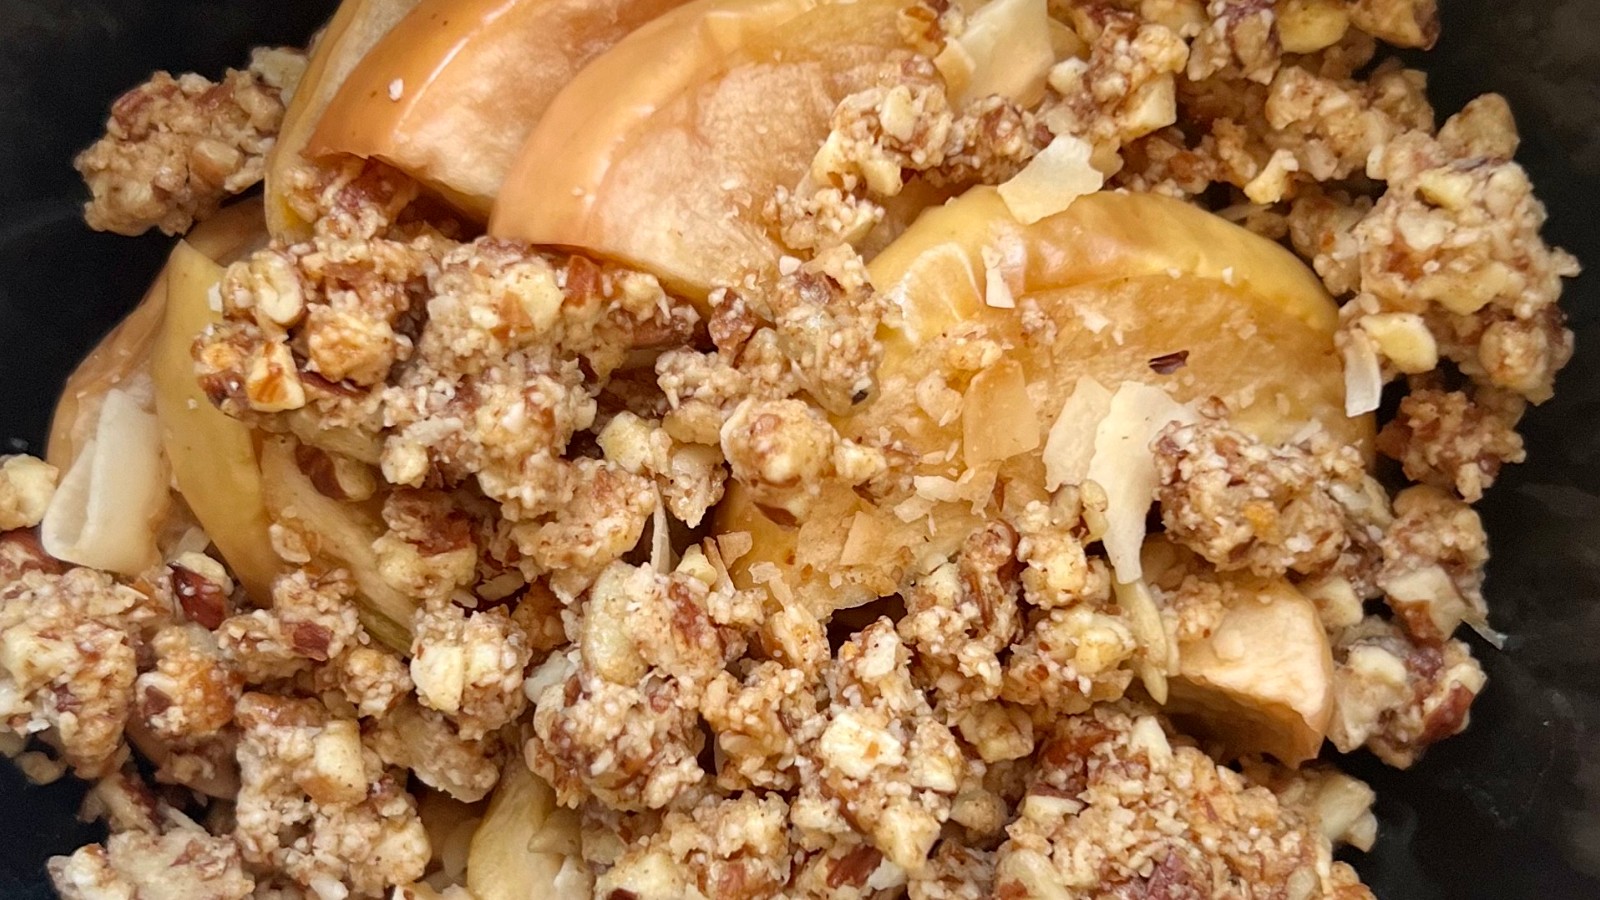 Image of Warm + Cooked Breakfast: Baked Apples + Granola